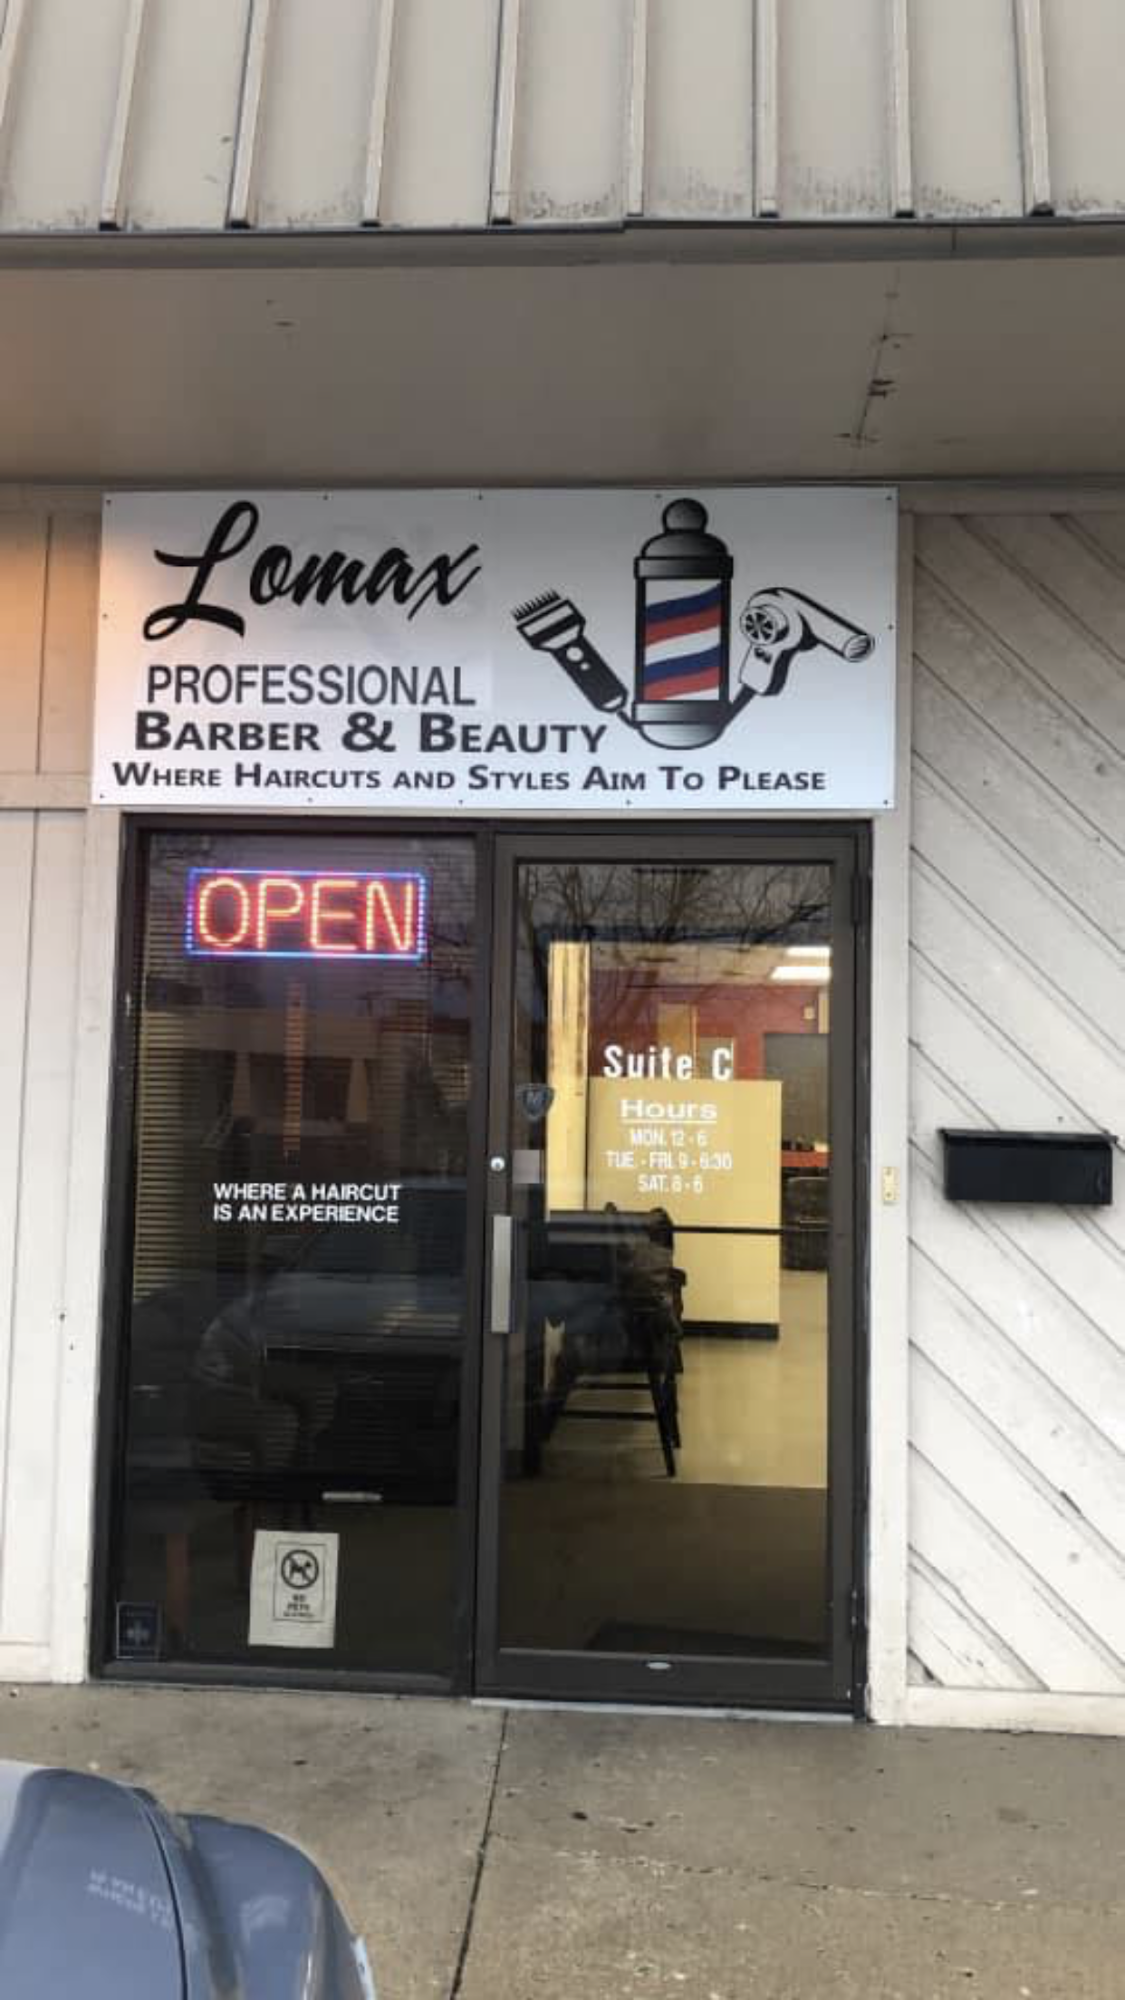 Lomax Professional Barber and Beauty Shop